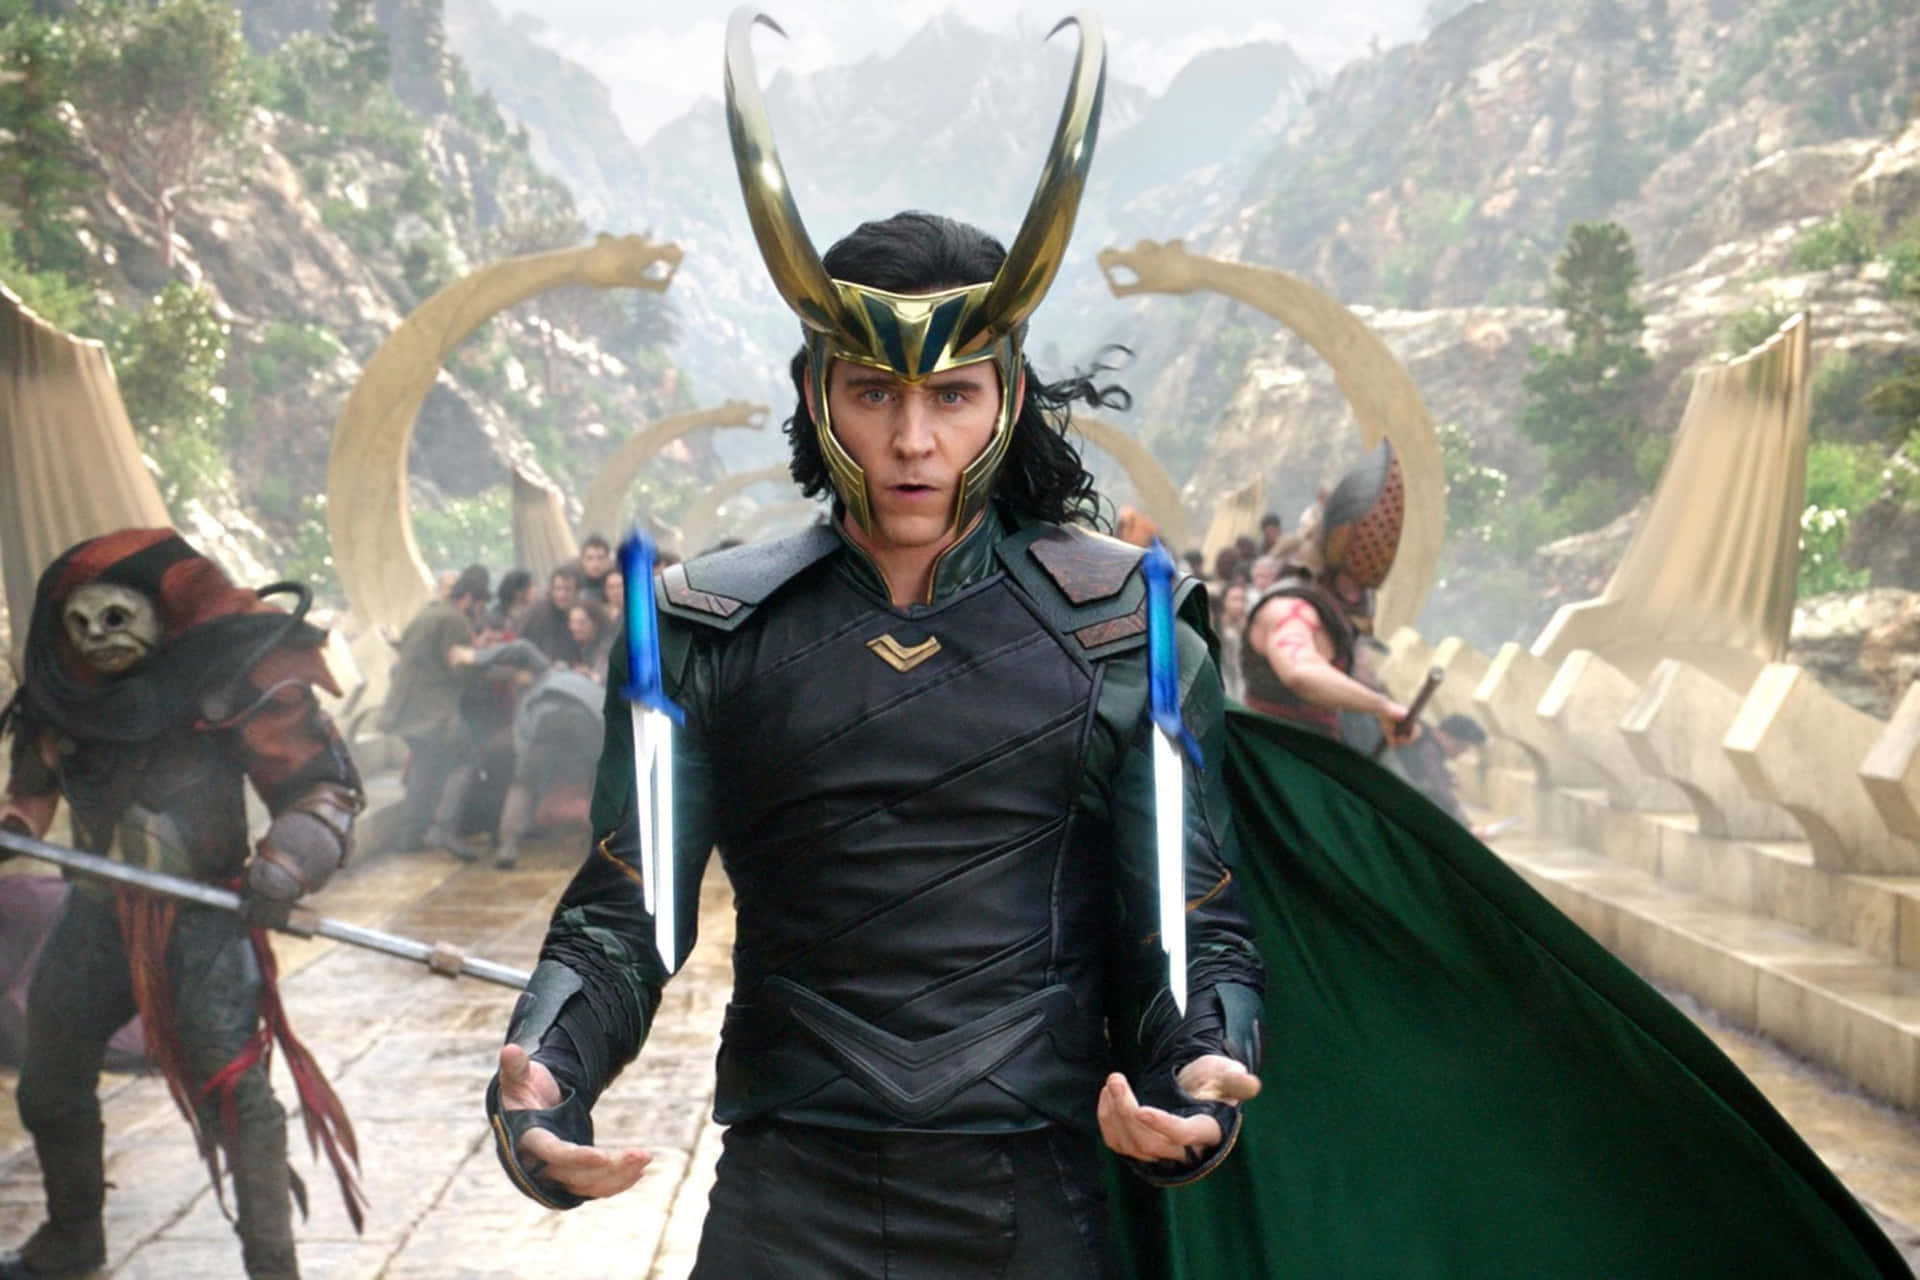 Caption: Cunning Loki with a Mysterious Smirk